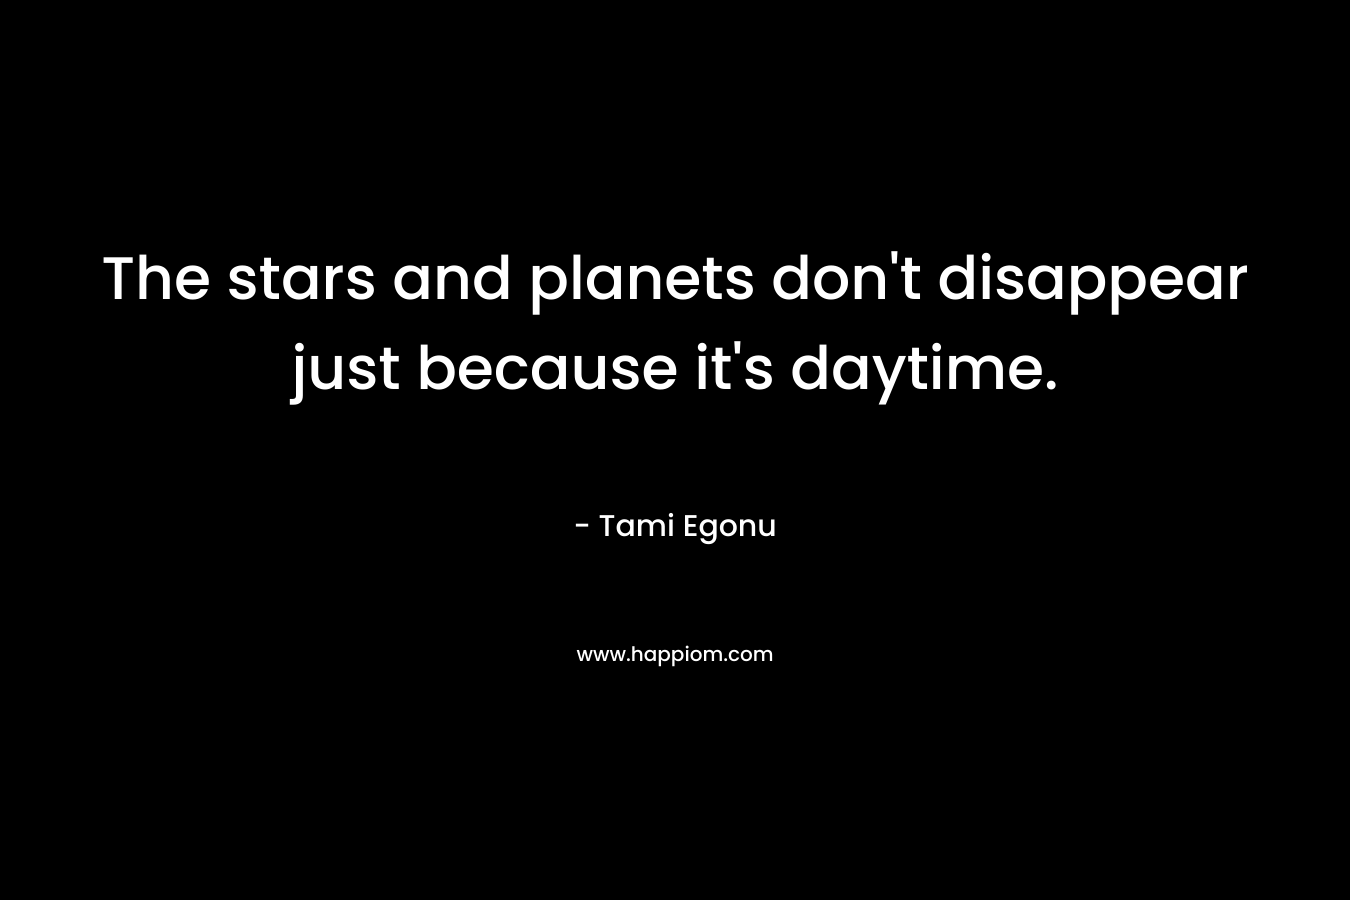 The stars and planets don't disappear just because it's daytime.